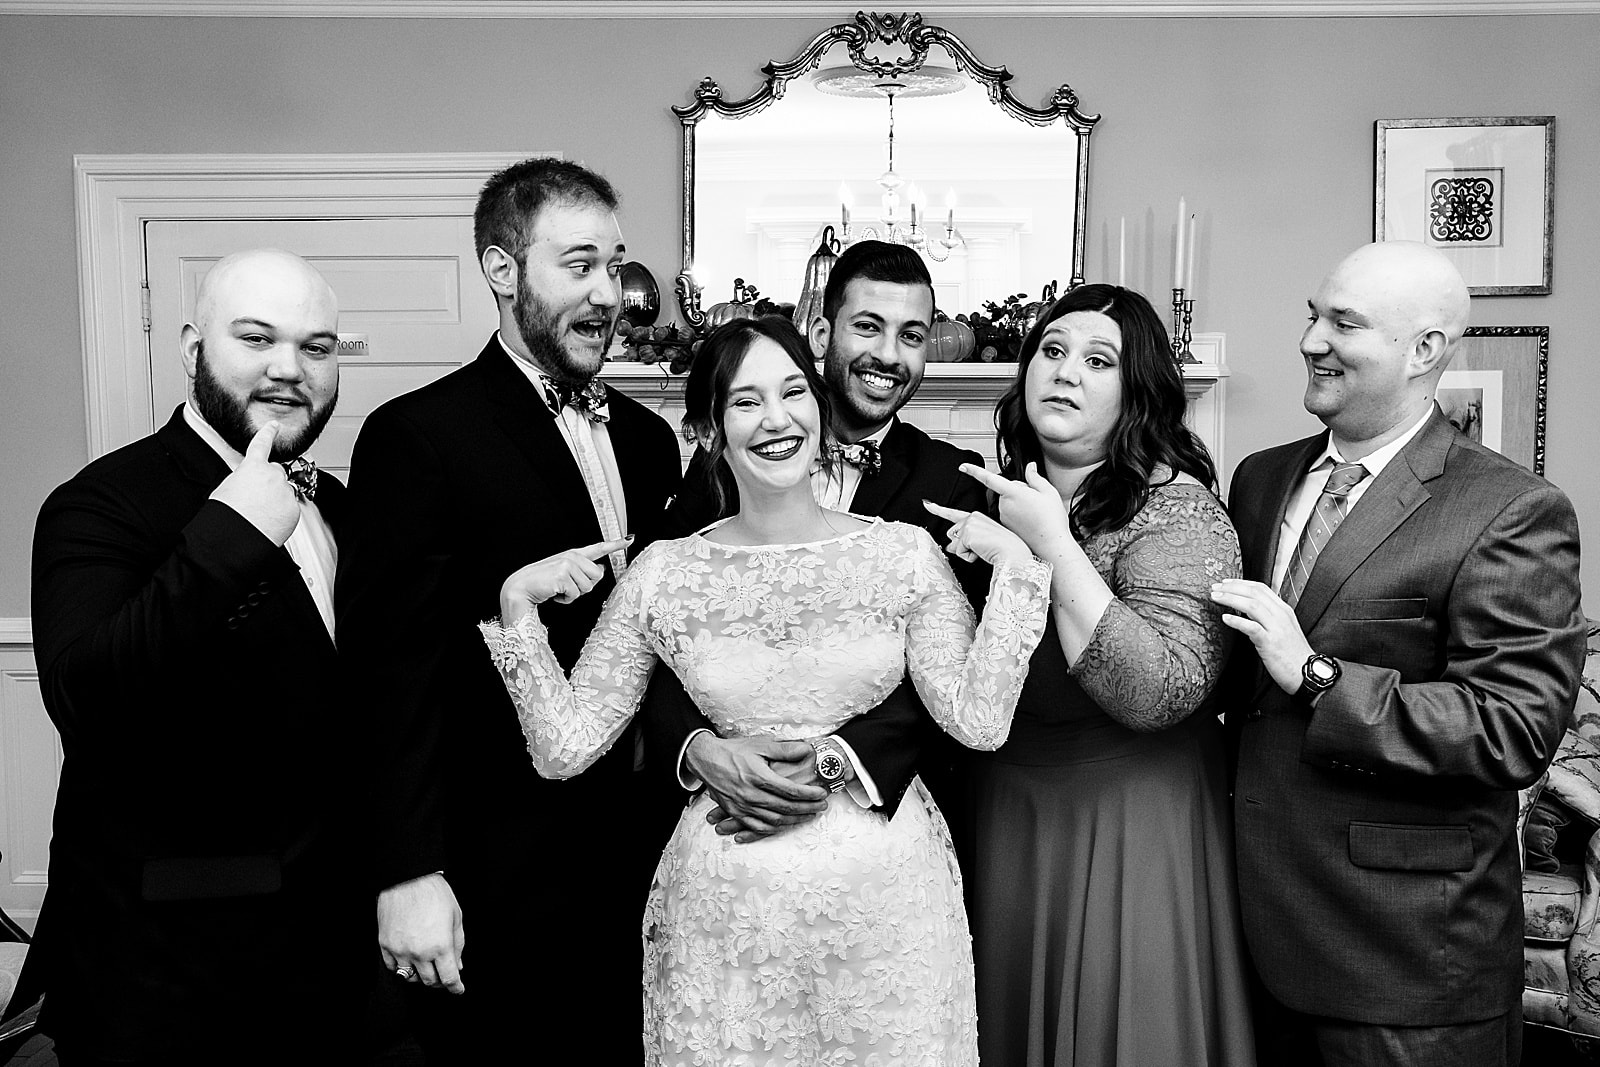 fun wedding photo: have all your siblings welcome their new in-law!